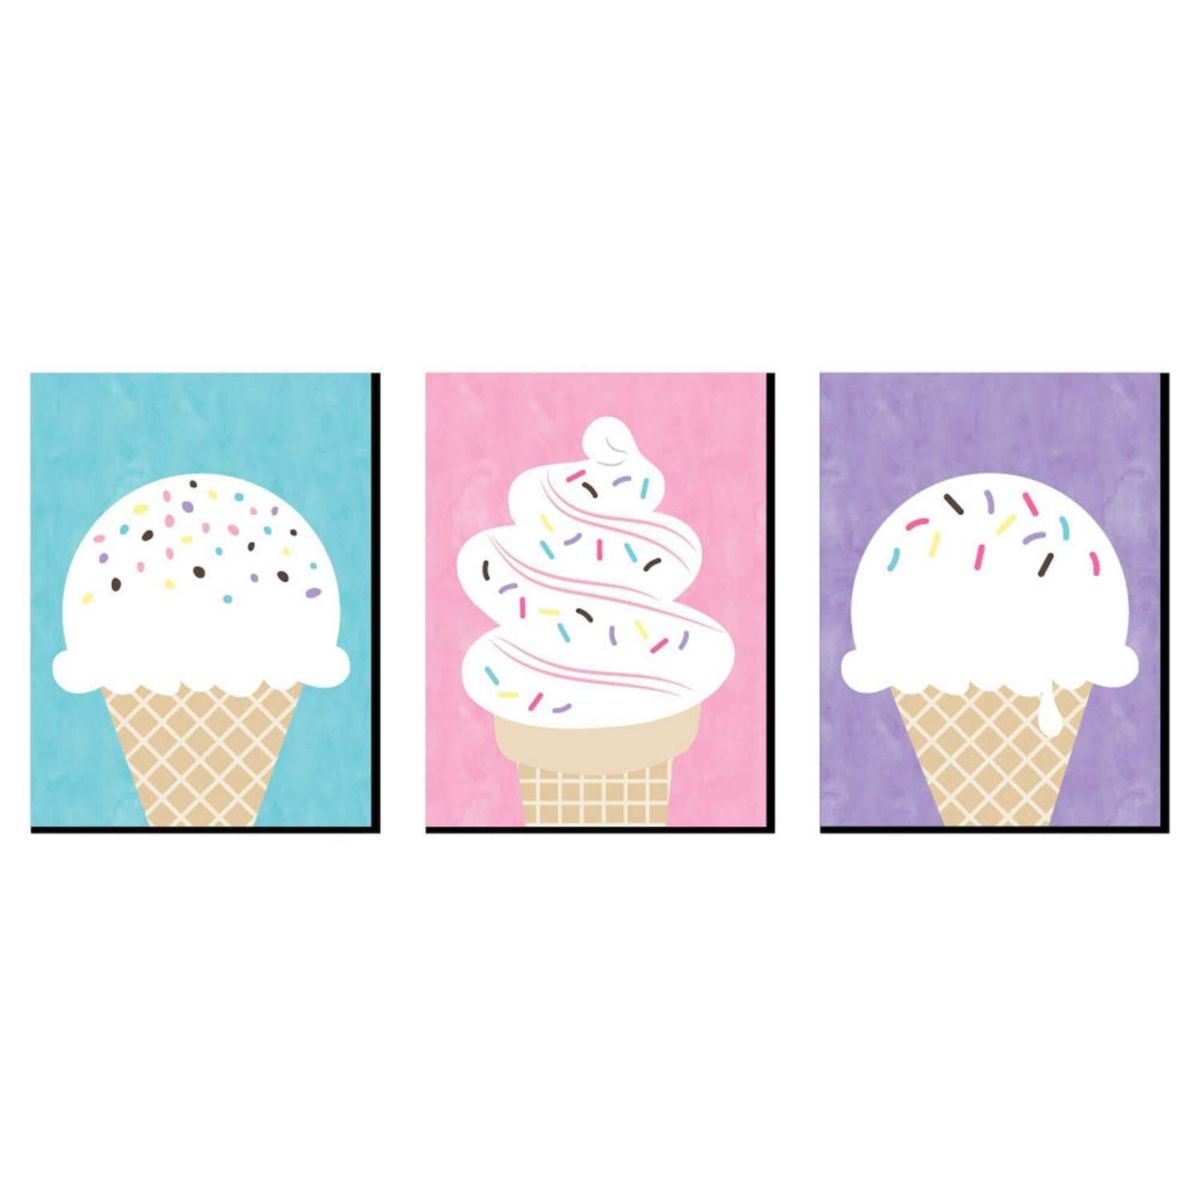 Big Dot of Happiness Scoop Up the Fun - Ice Cream - Sprinkles Kitchen Wall Art, Nursery Decor and Restaurant Decor - 7.5 x 10 inches - Set of 3 Prints Big Dot of Happiness